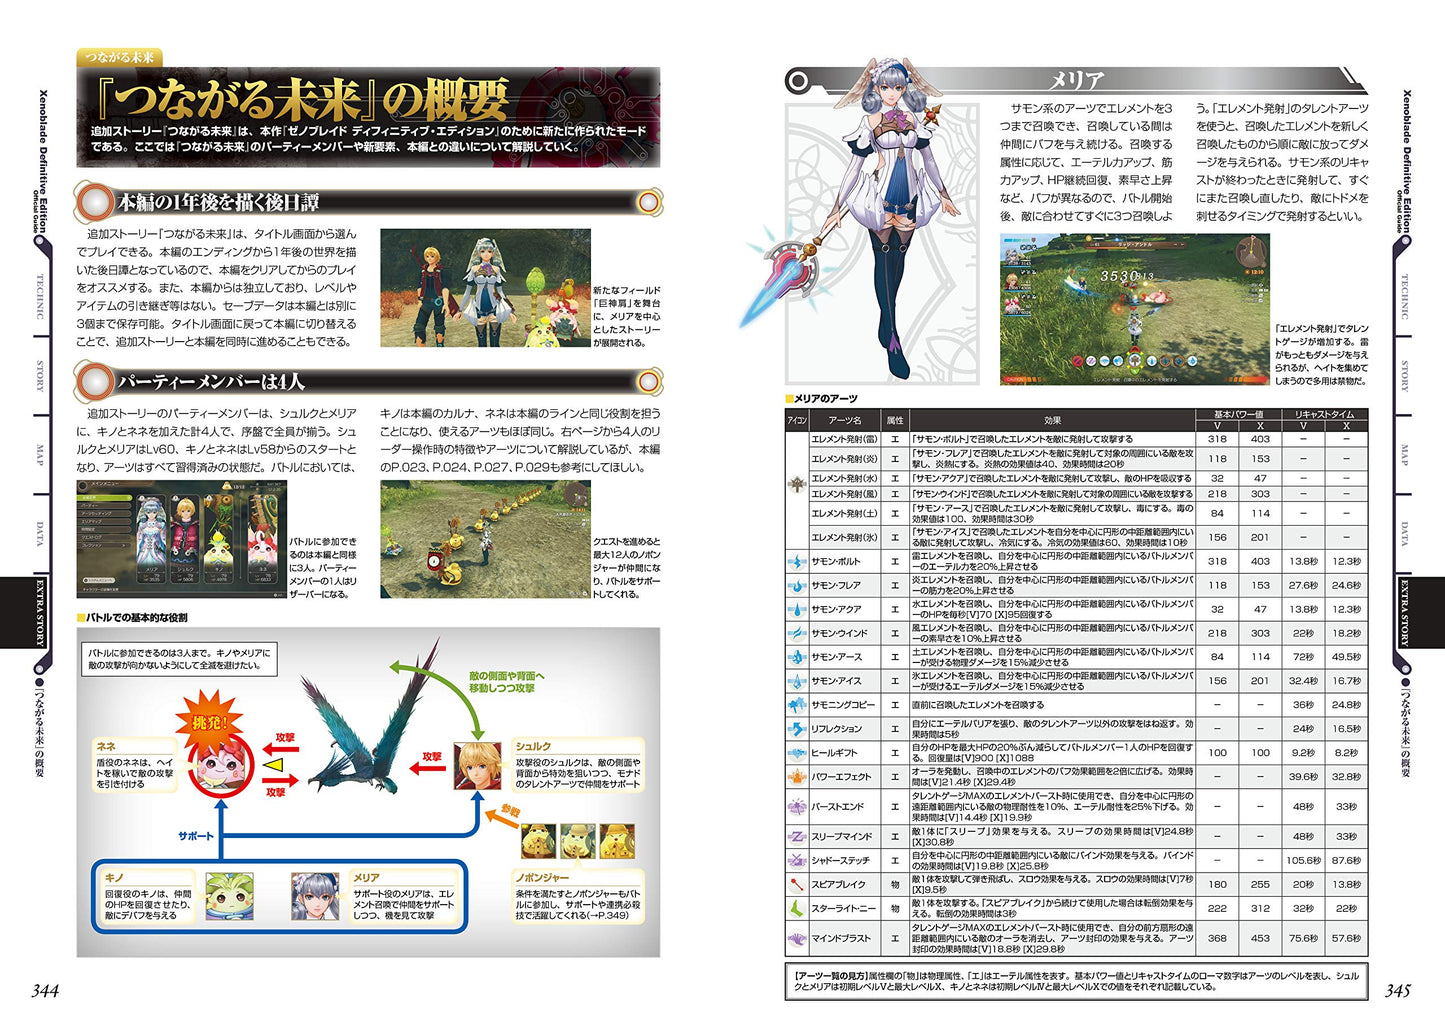 Xenoblade Chronicles Definitive Edition Official Guide